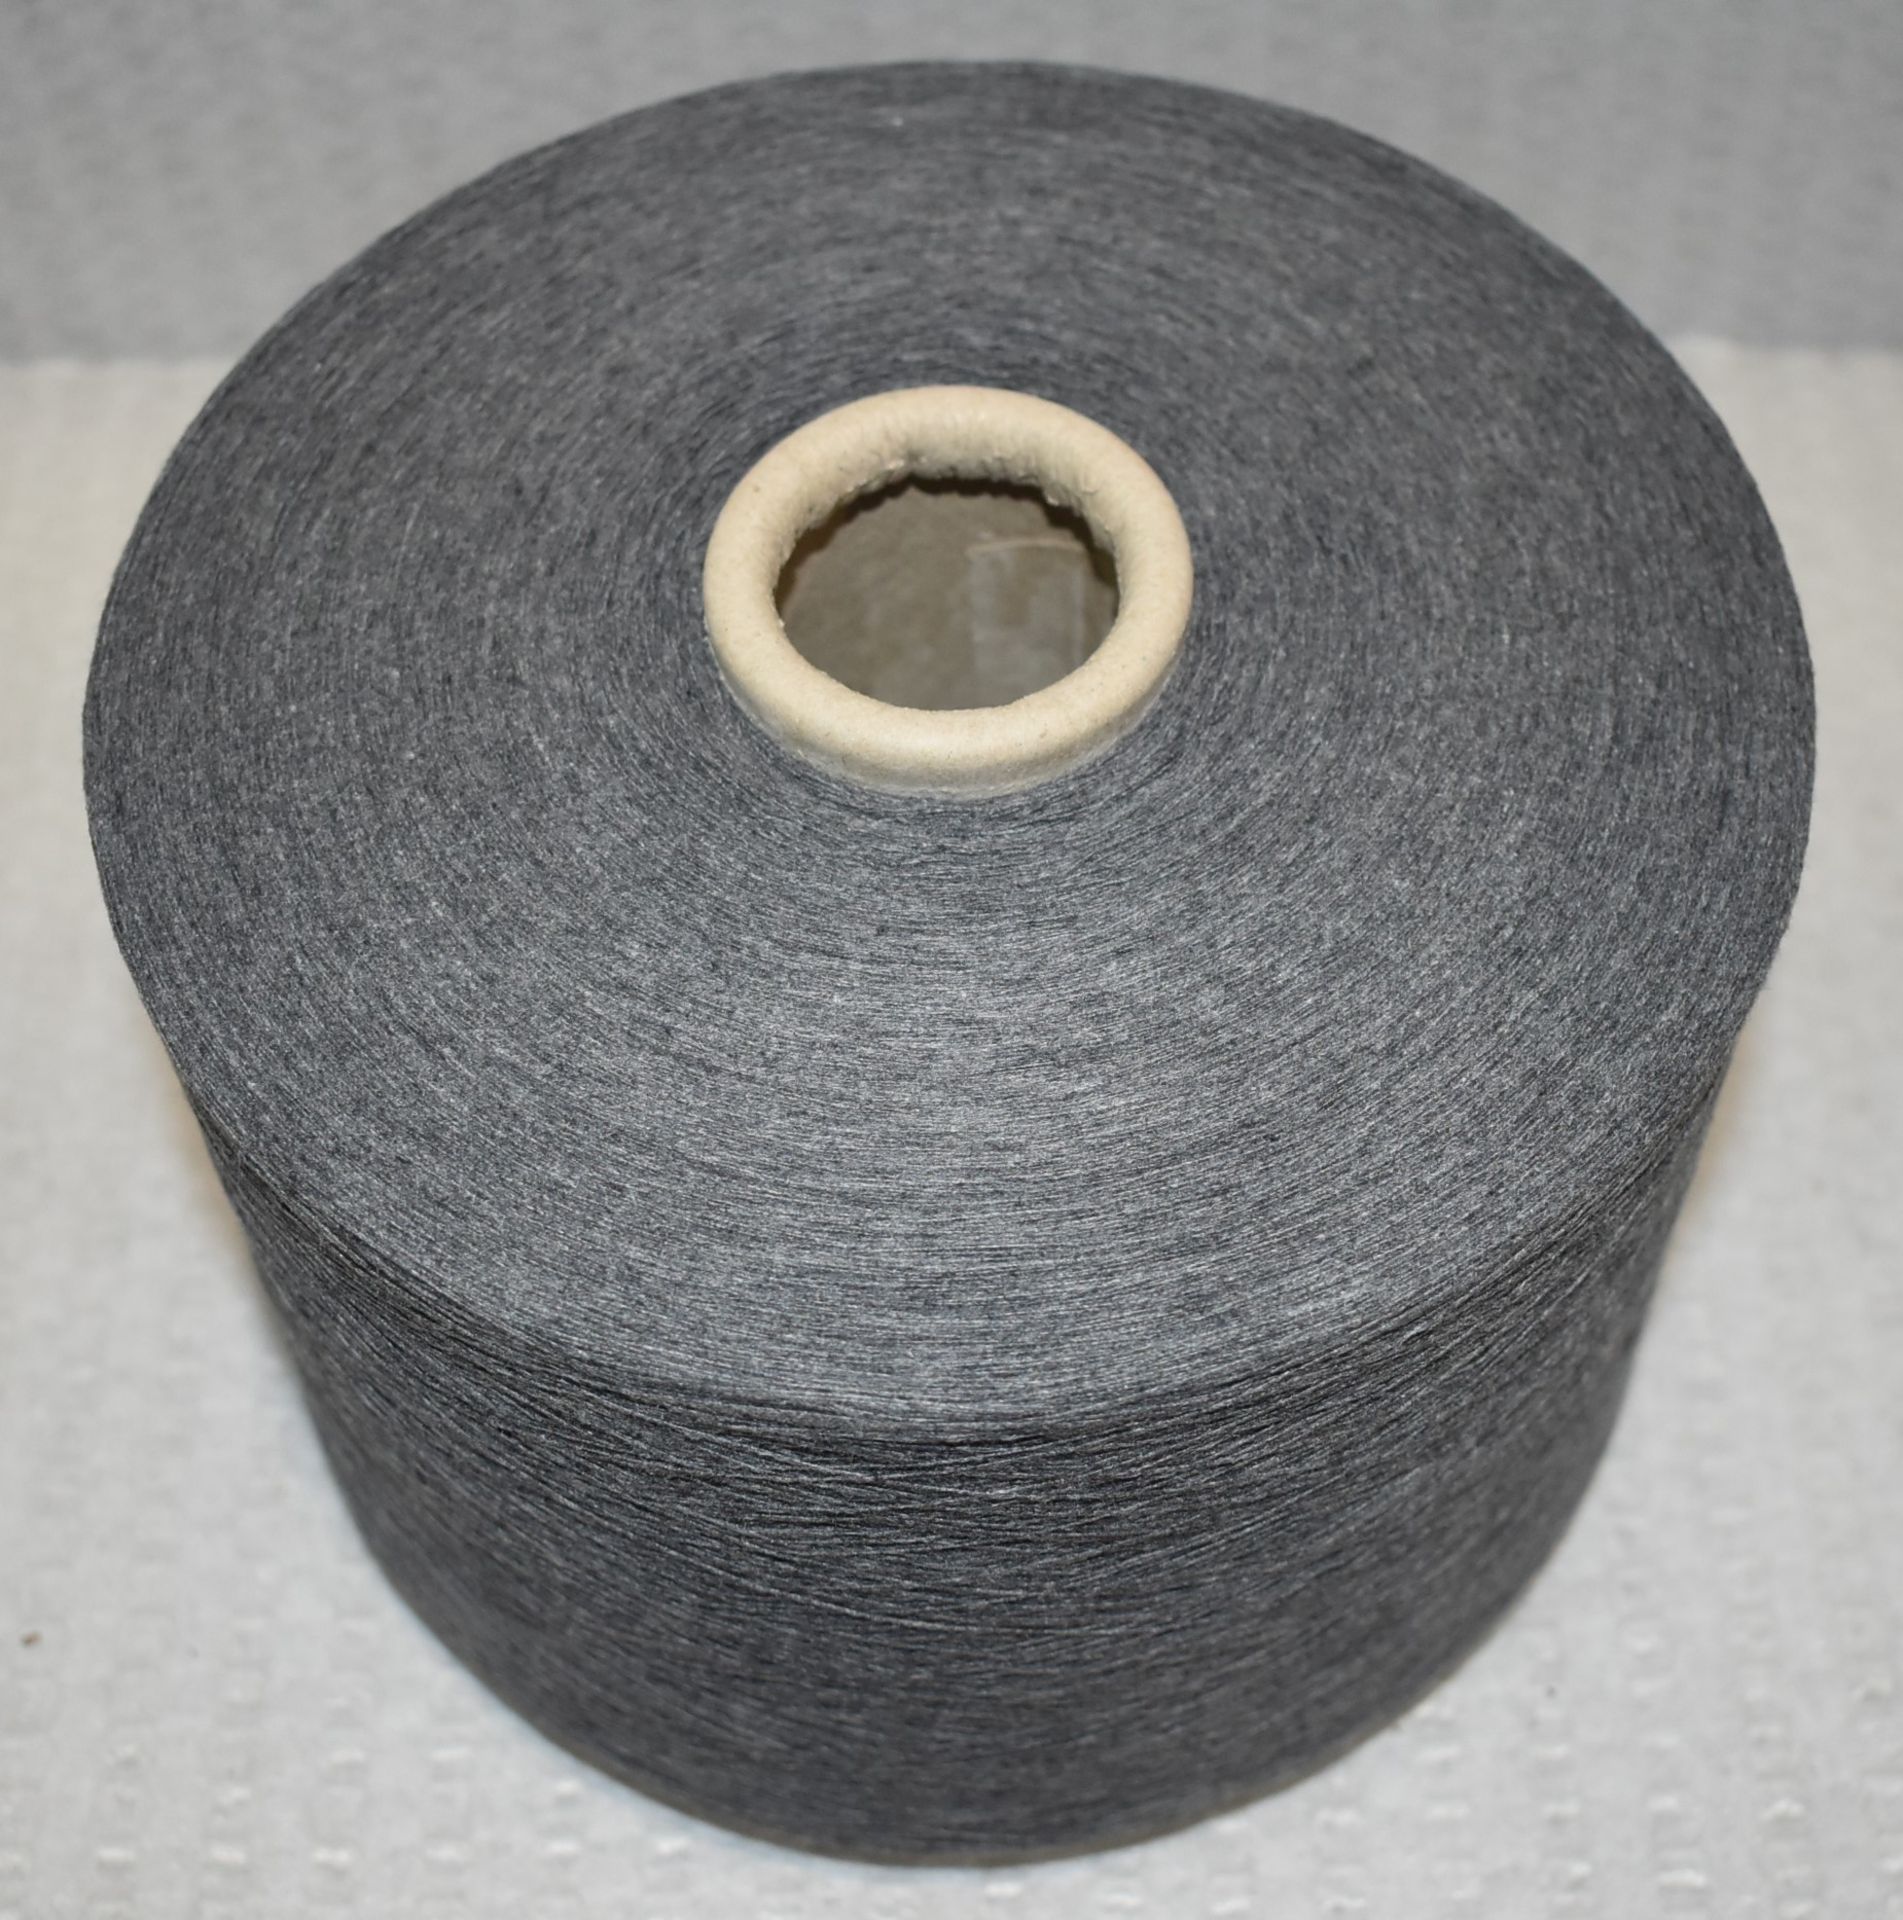 4 x Cones of 1/13 MicroCotton Knitting Yarn - Mid Grey - Approx Weight: 2,500g - New Stock ABL Yarn - Image 4 of 17